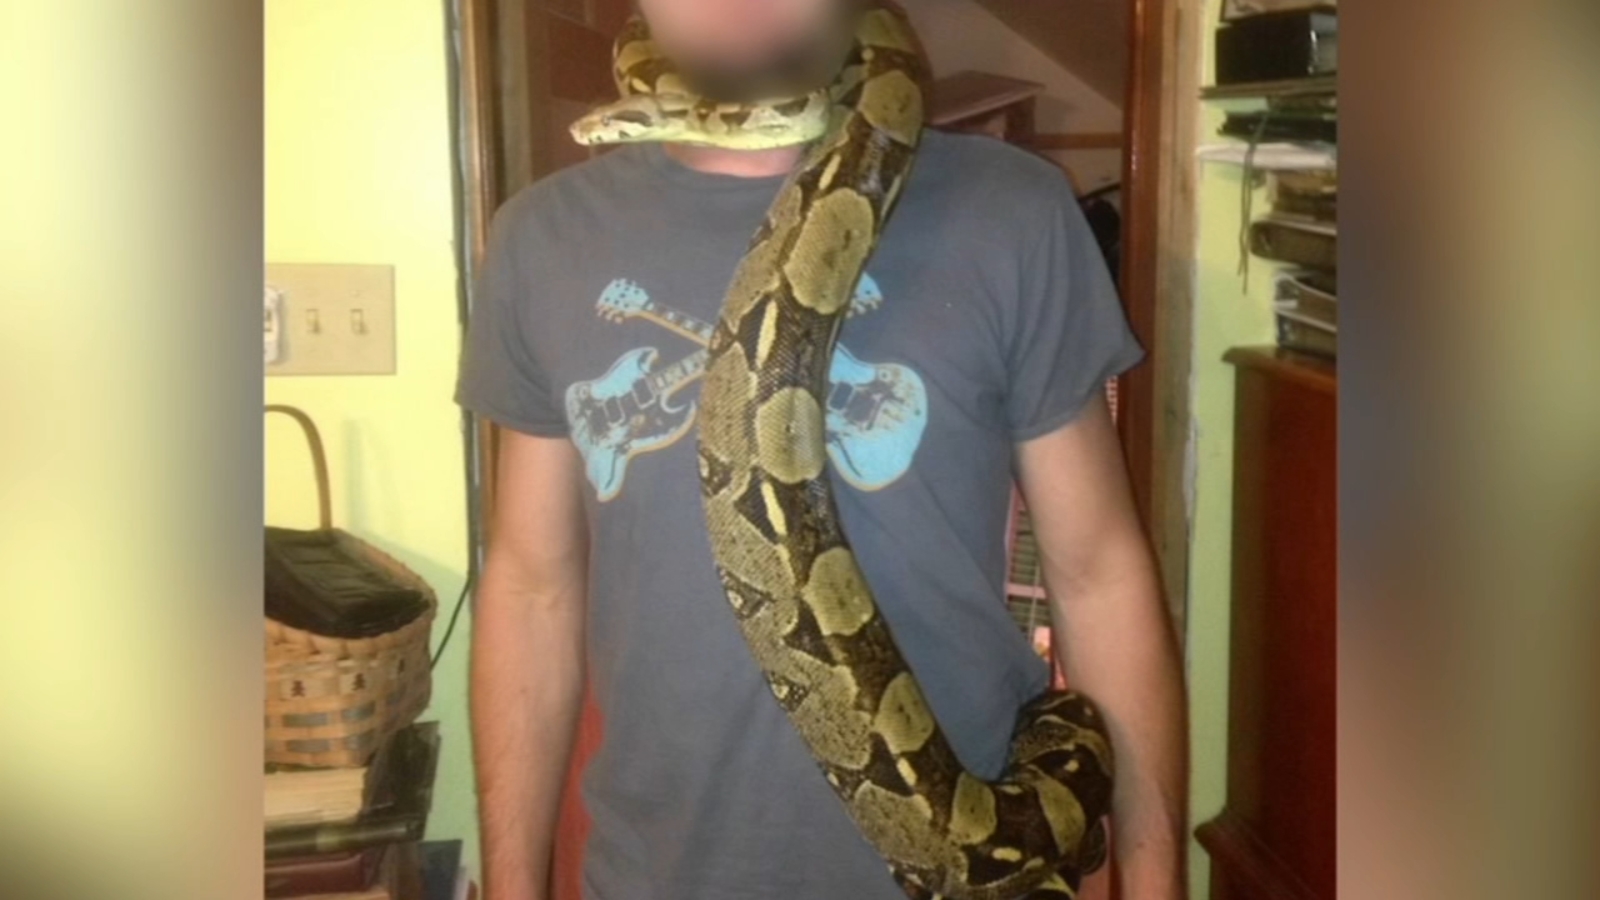  Missing boa constrictor causes concern among neighbors in Pennsylvania town 